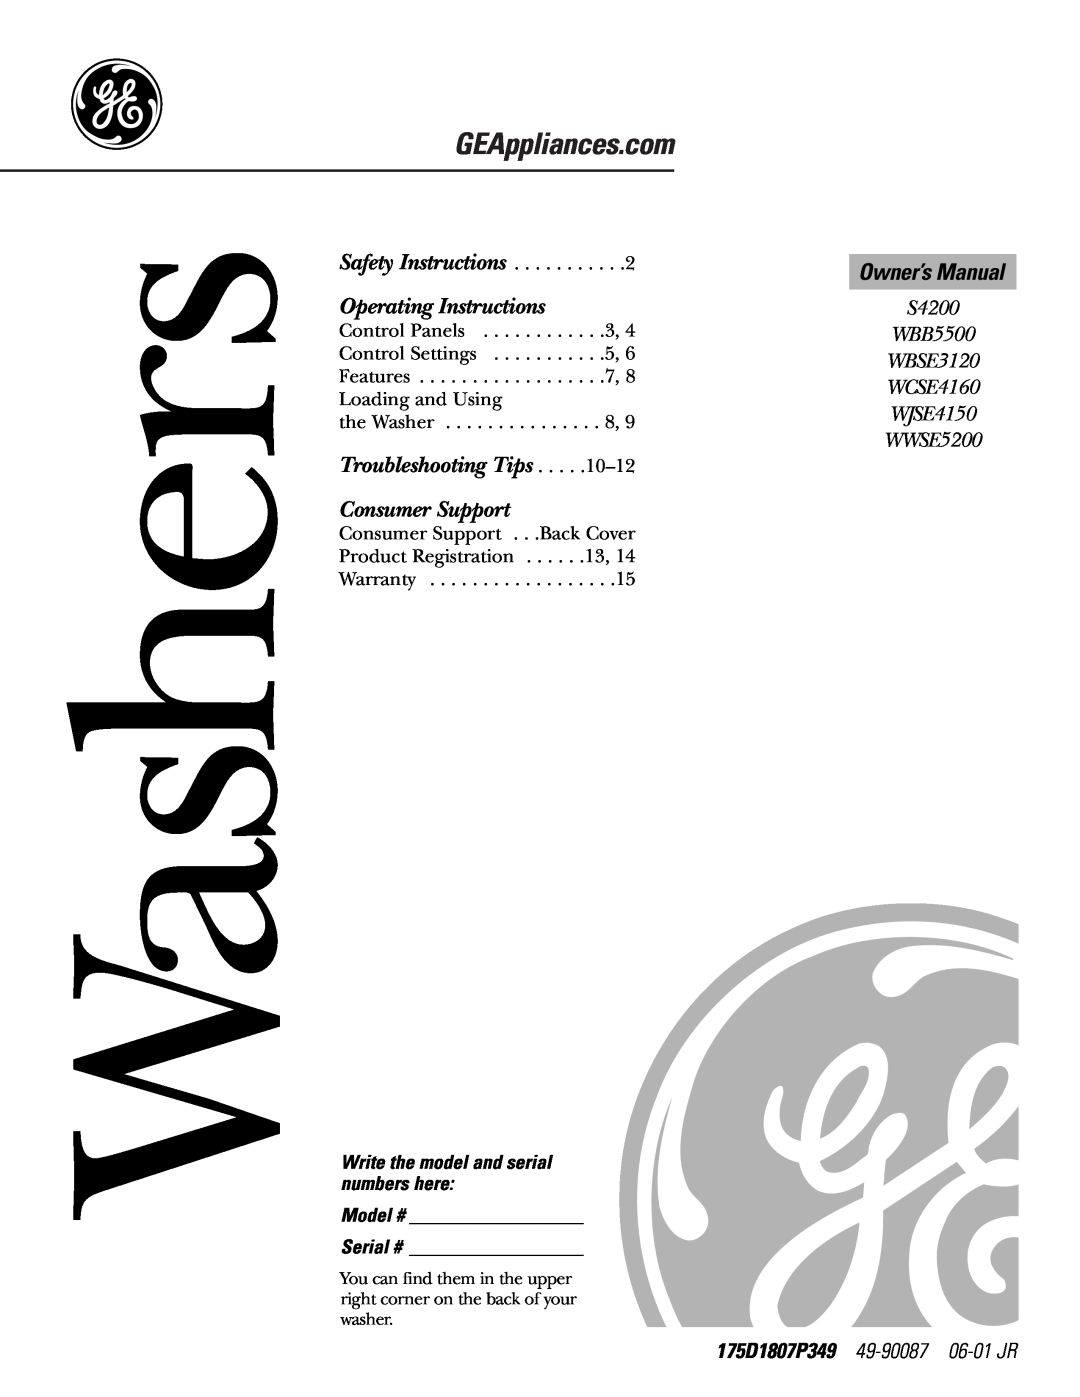 GE WASE5210, WLE4000, S4200 owner manual 175D1807P393 49-90130 03-02JR, Washers, Operating Instructions, Consumer Support 